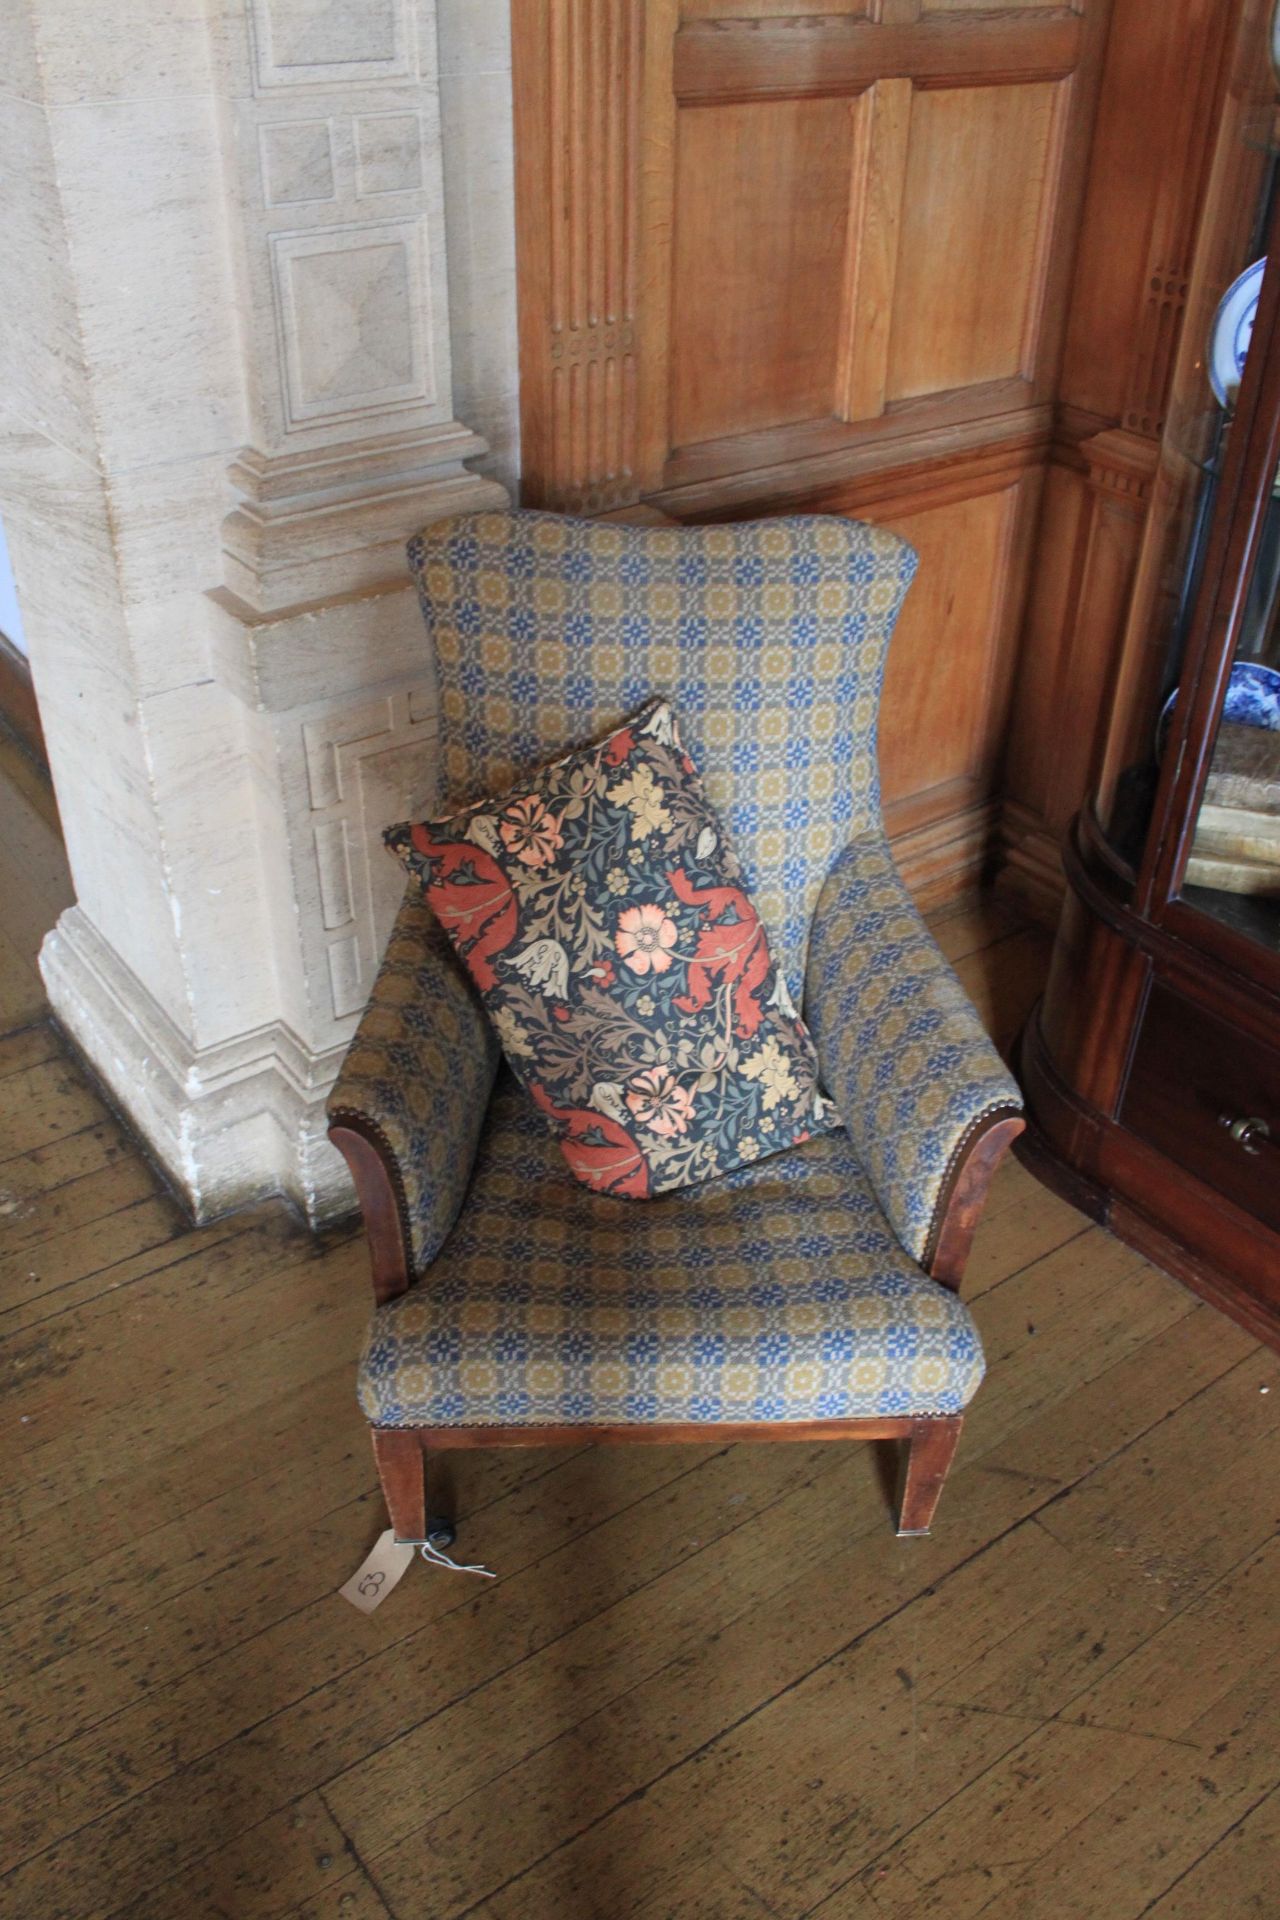 A Wingback Armchair Boasts A Classic Wingback Design Complete With Scrolled Arms On Castors Complete